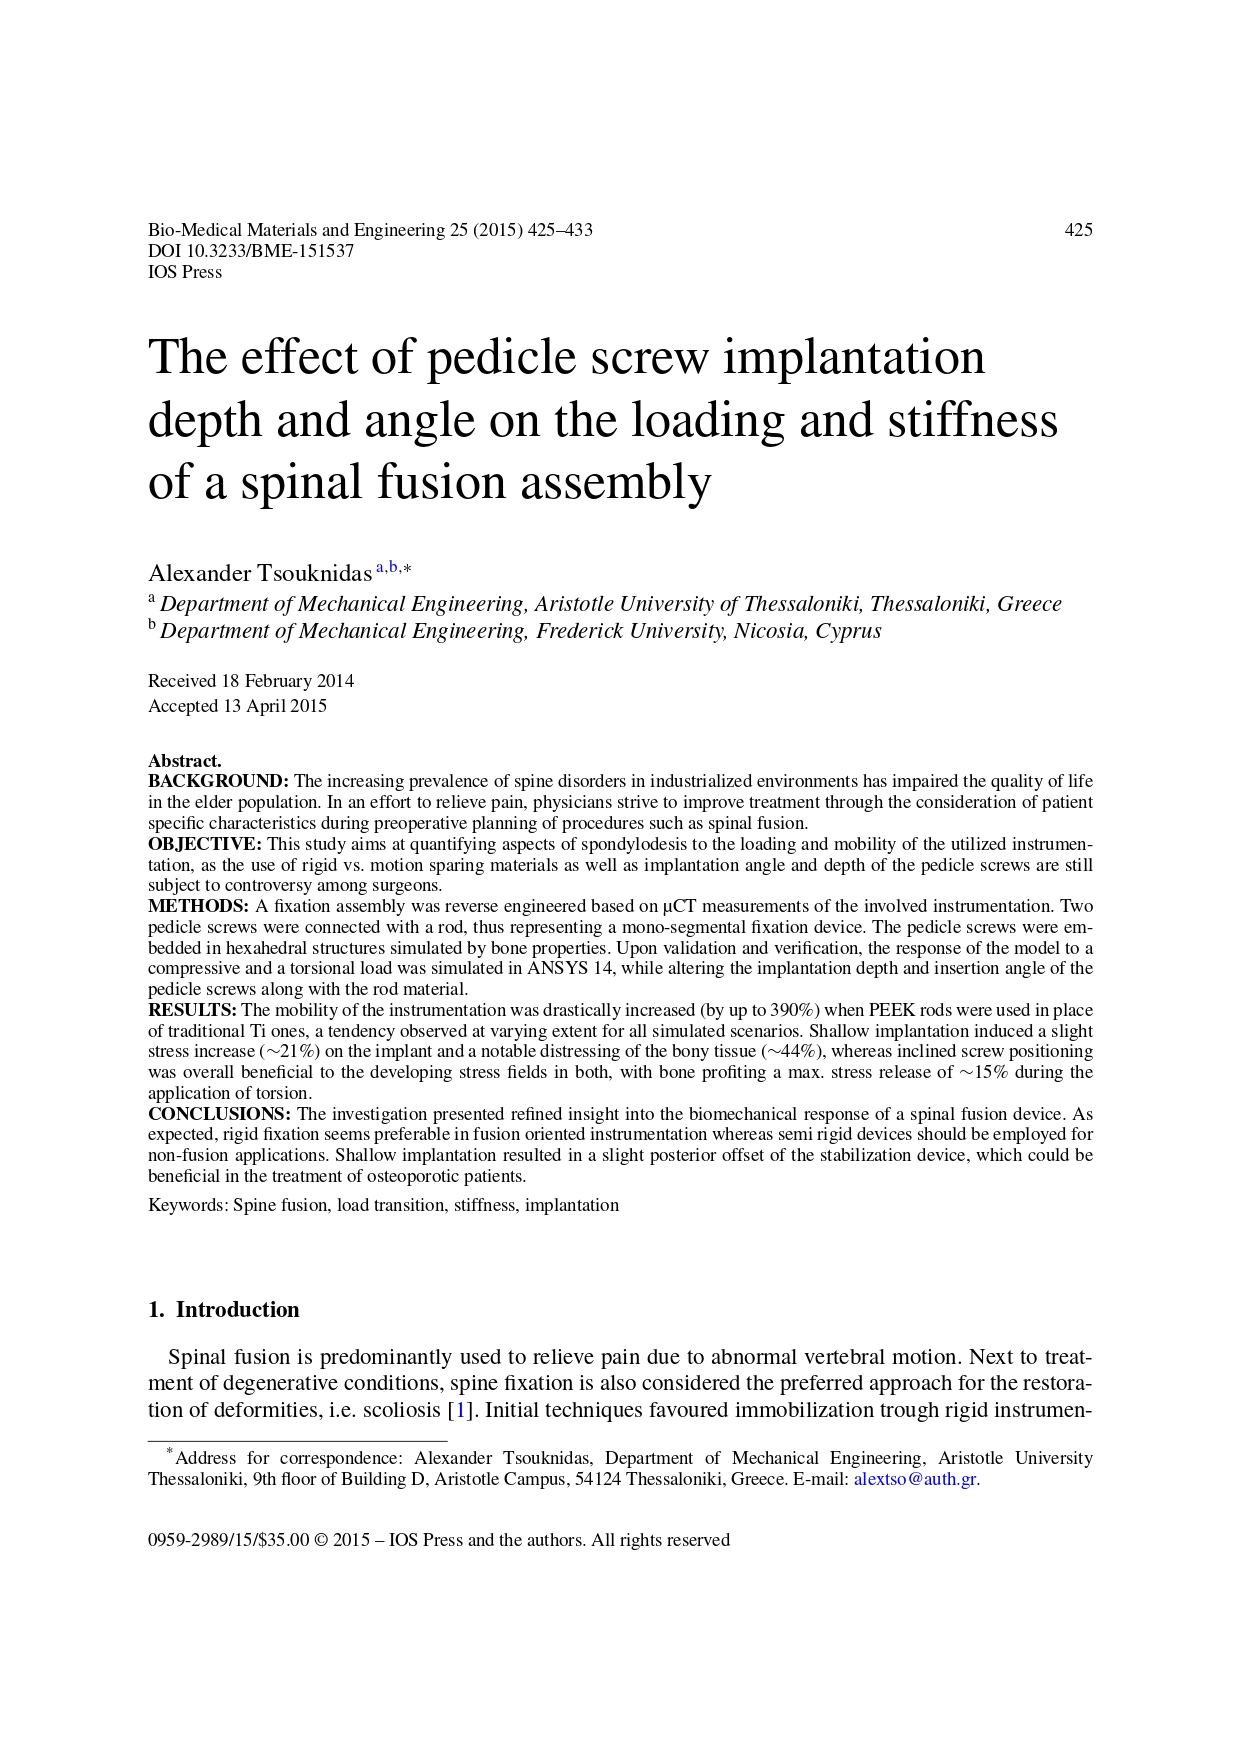 The effect of pedicle screw implantation depth and angle on the loading and stiffness of a spinal fusion assembly_page-0001.jpg